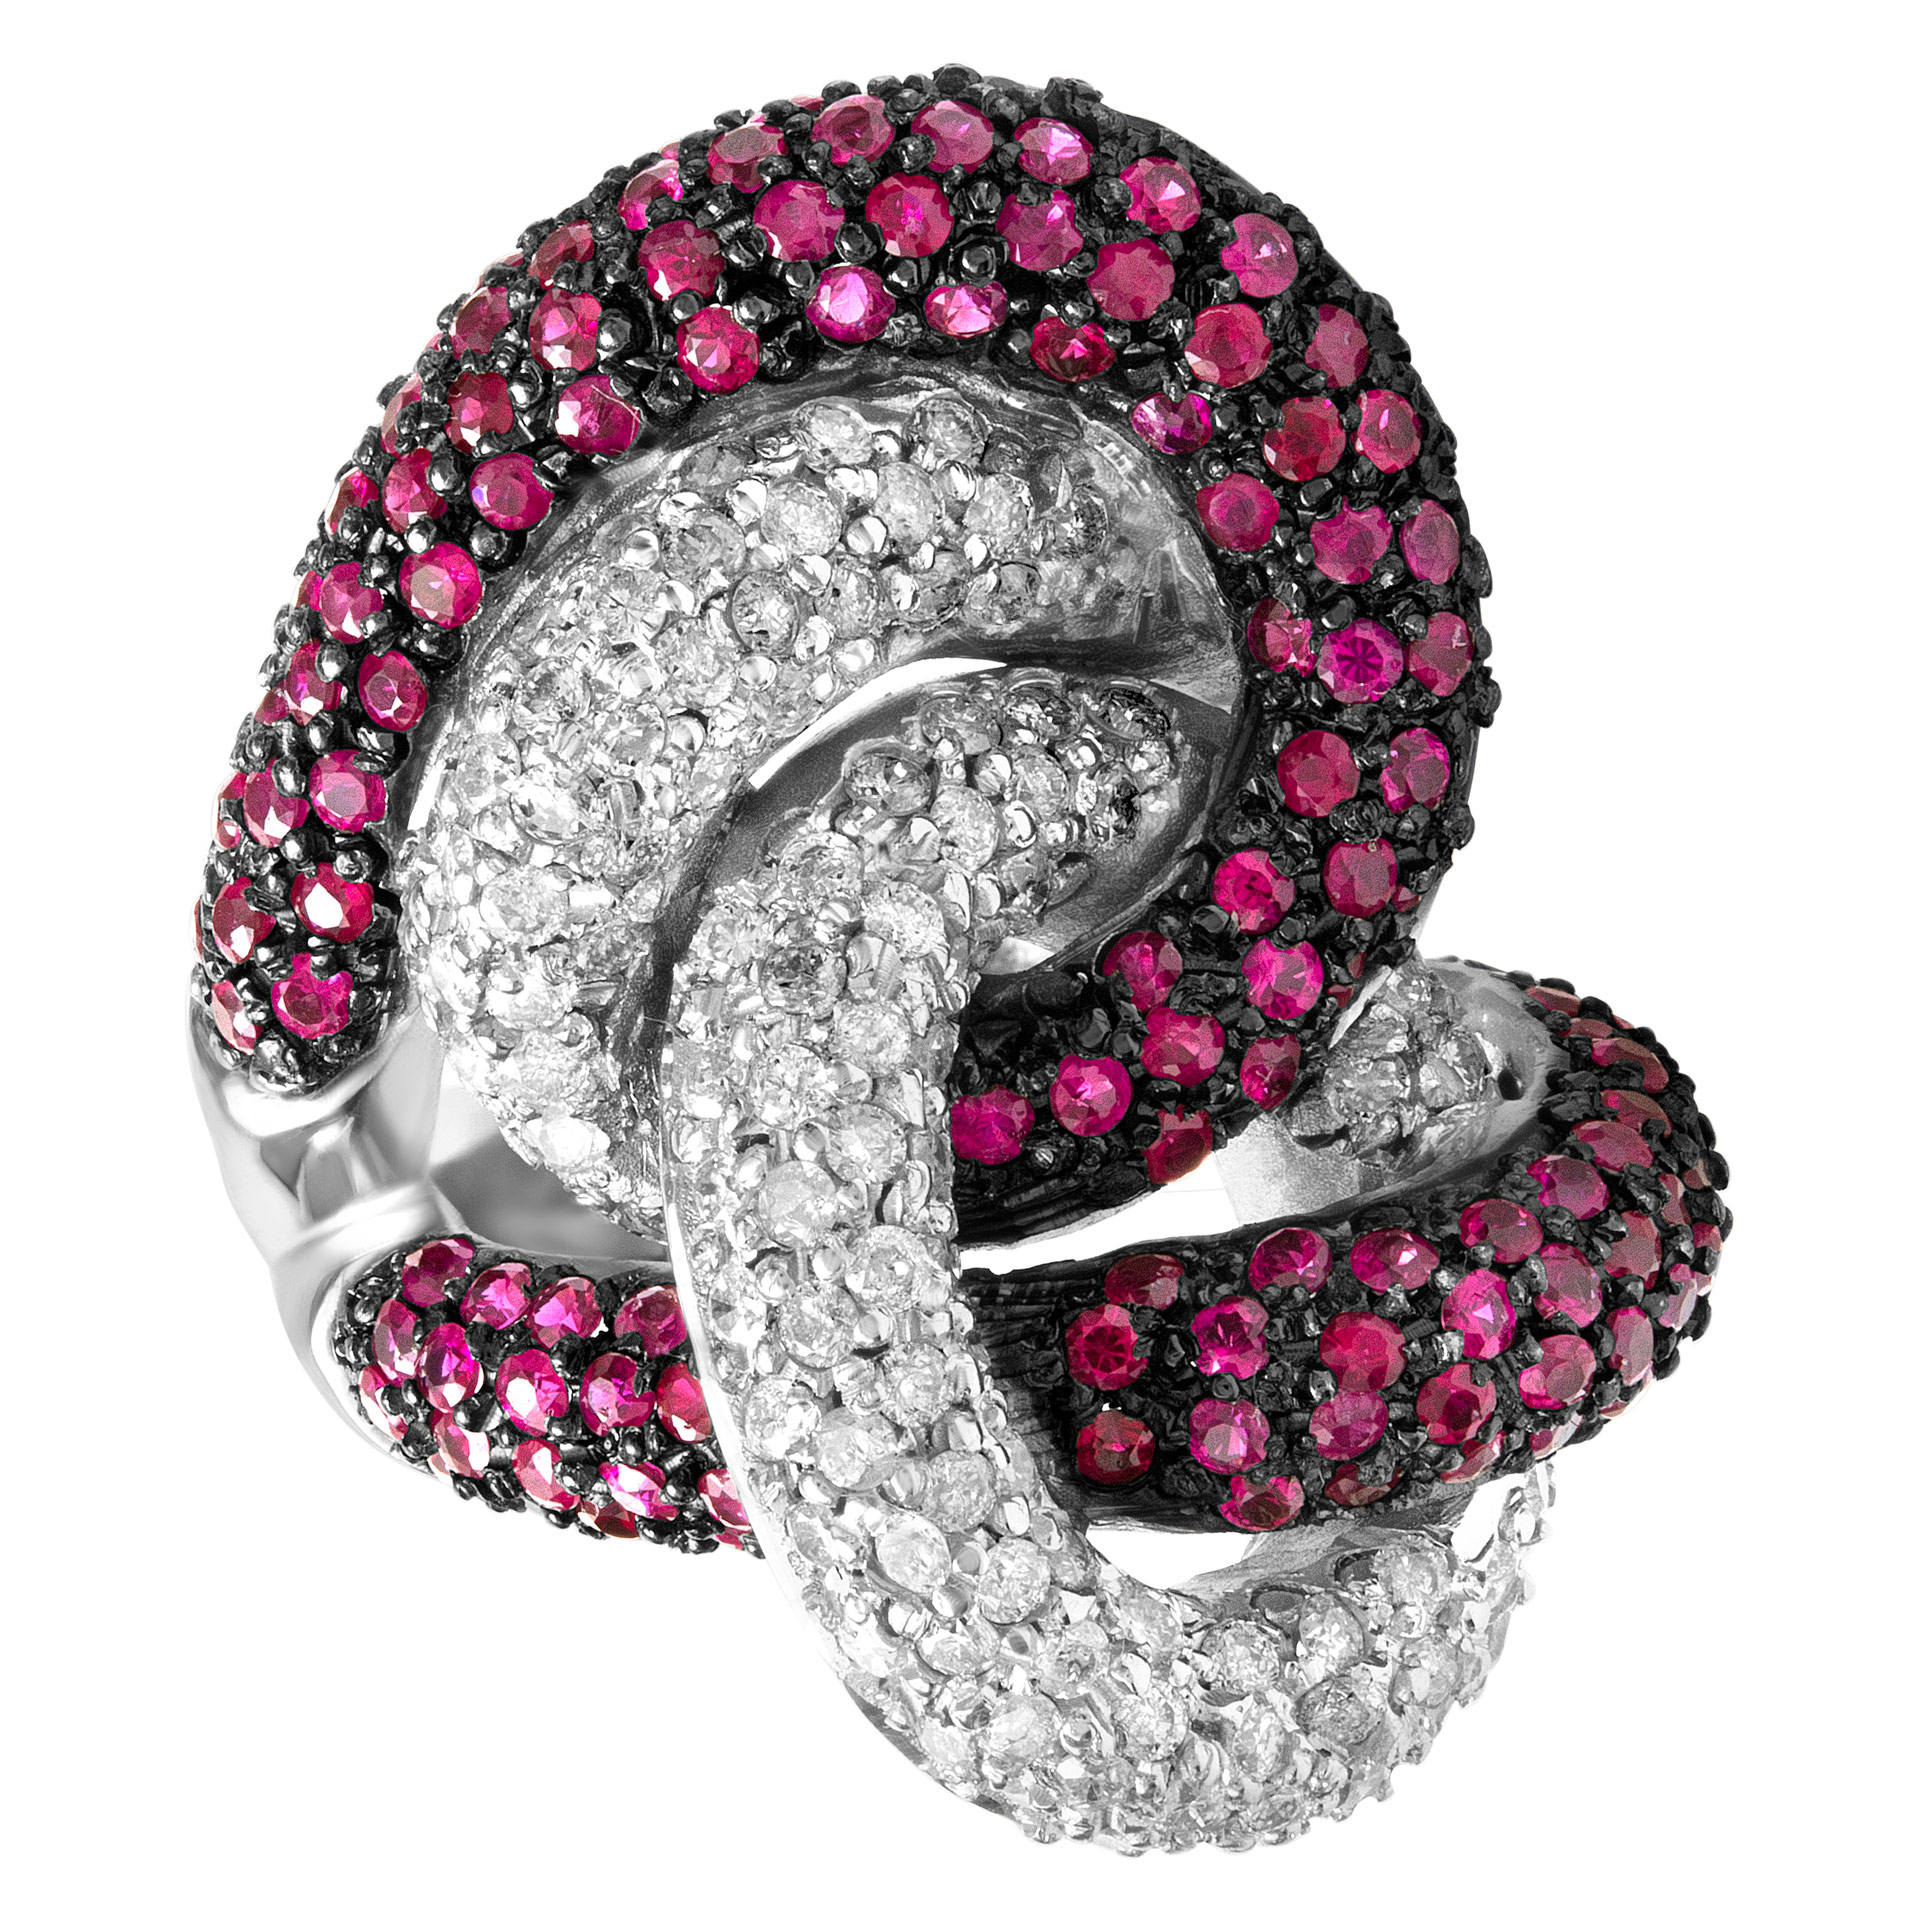 Diamond and ruby swirl ring in 18k white gold. 2.02 cts in rubies, 1.10cts in diamonds